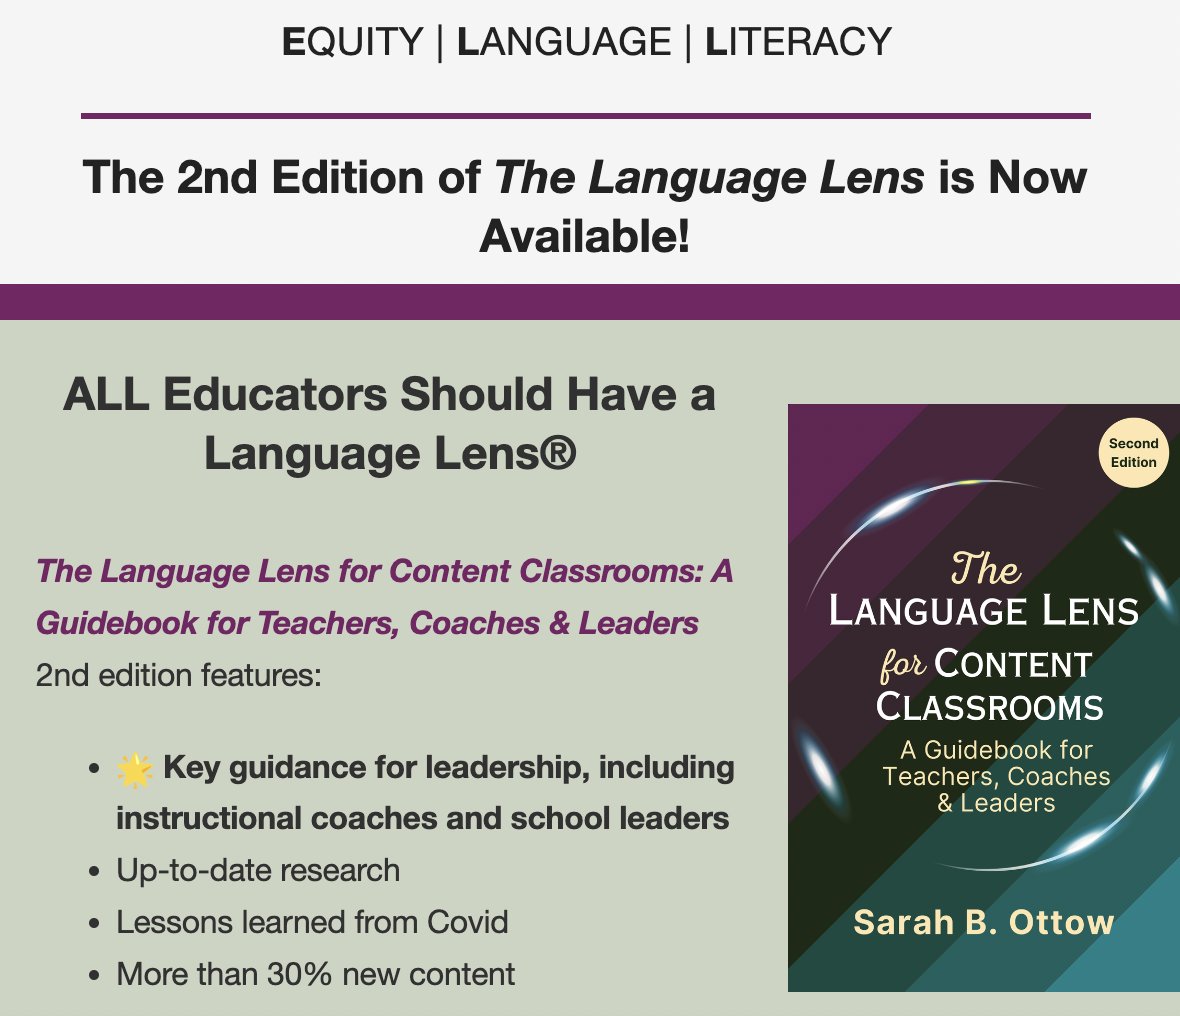 Excited to announce @SarahOttow's 2nd edition of her beloved The Language Lens book!

sarahottow.com/the-language-l…